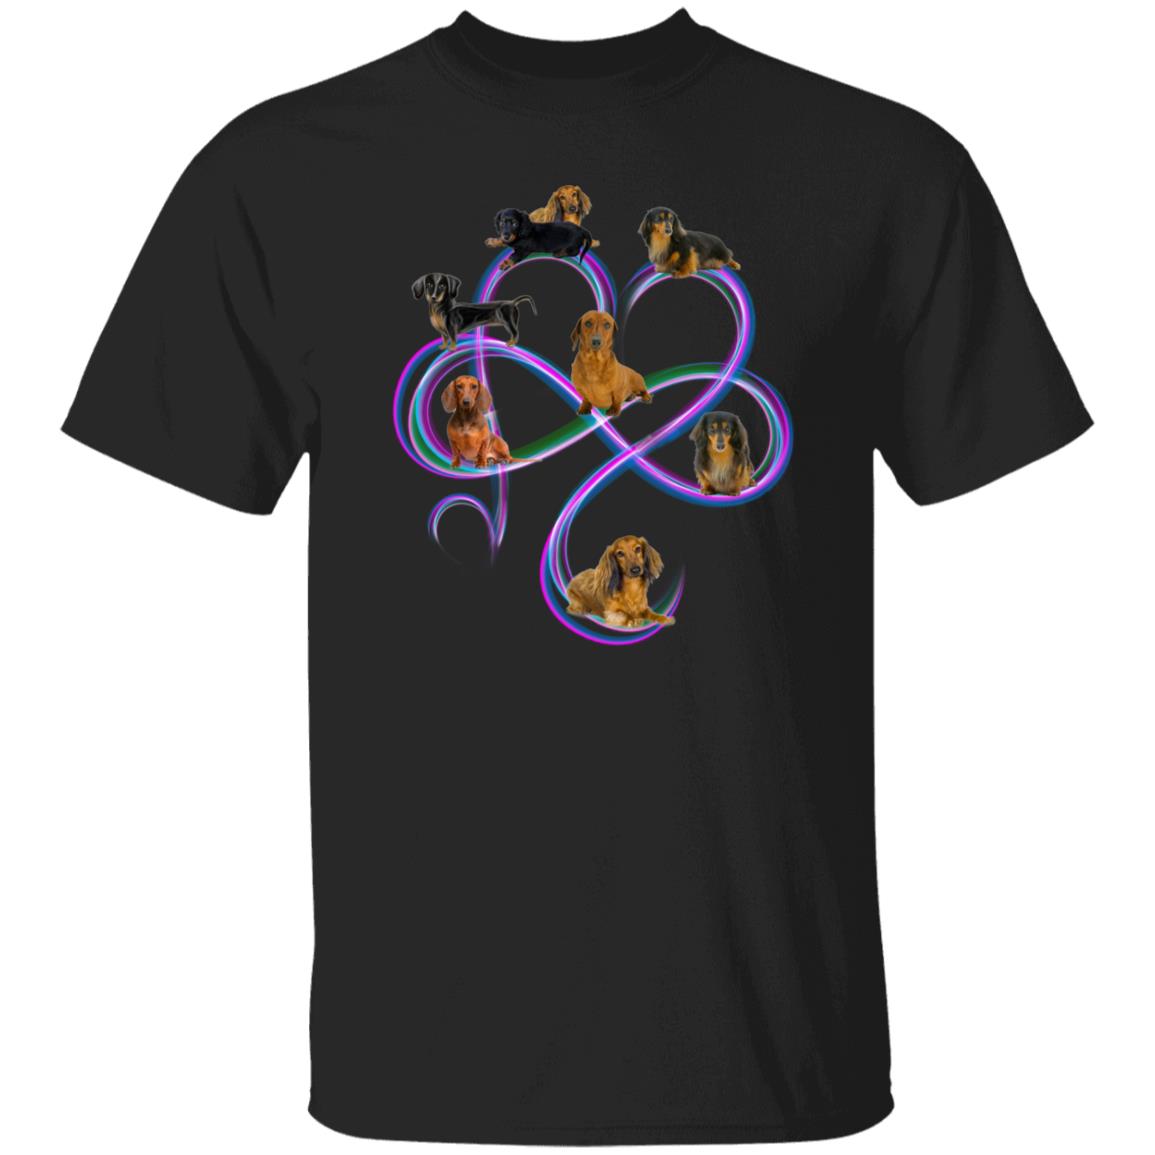 Infinity dogs Unisex t-shirt gift cool dogs tee black navy dark heather-Family-Gift-Planet